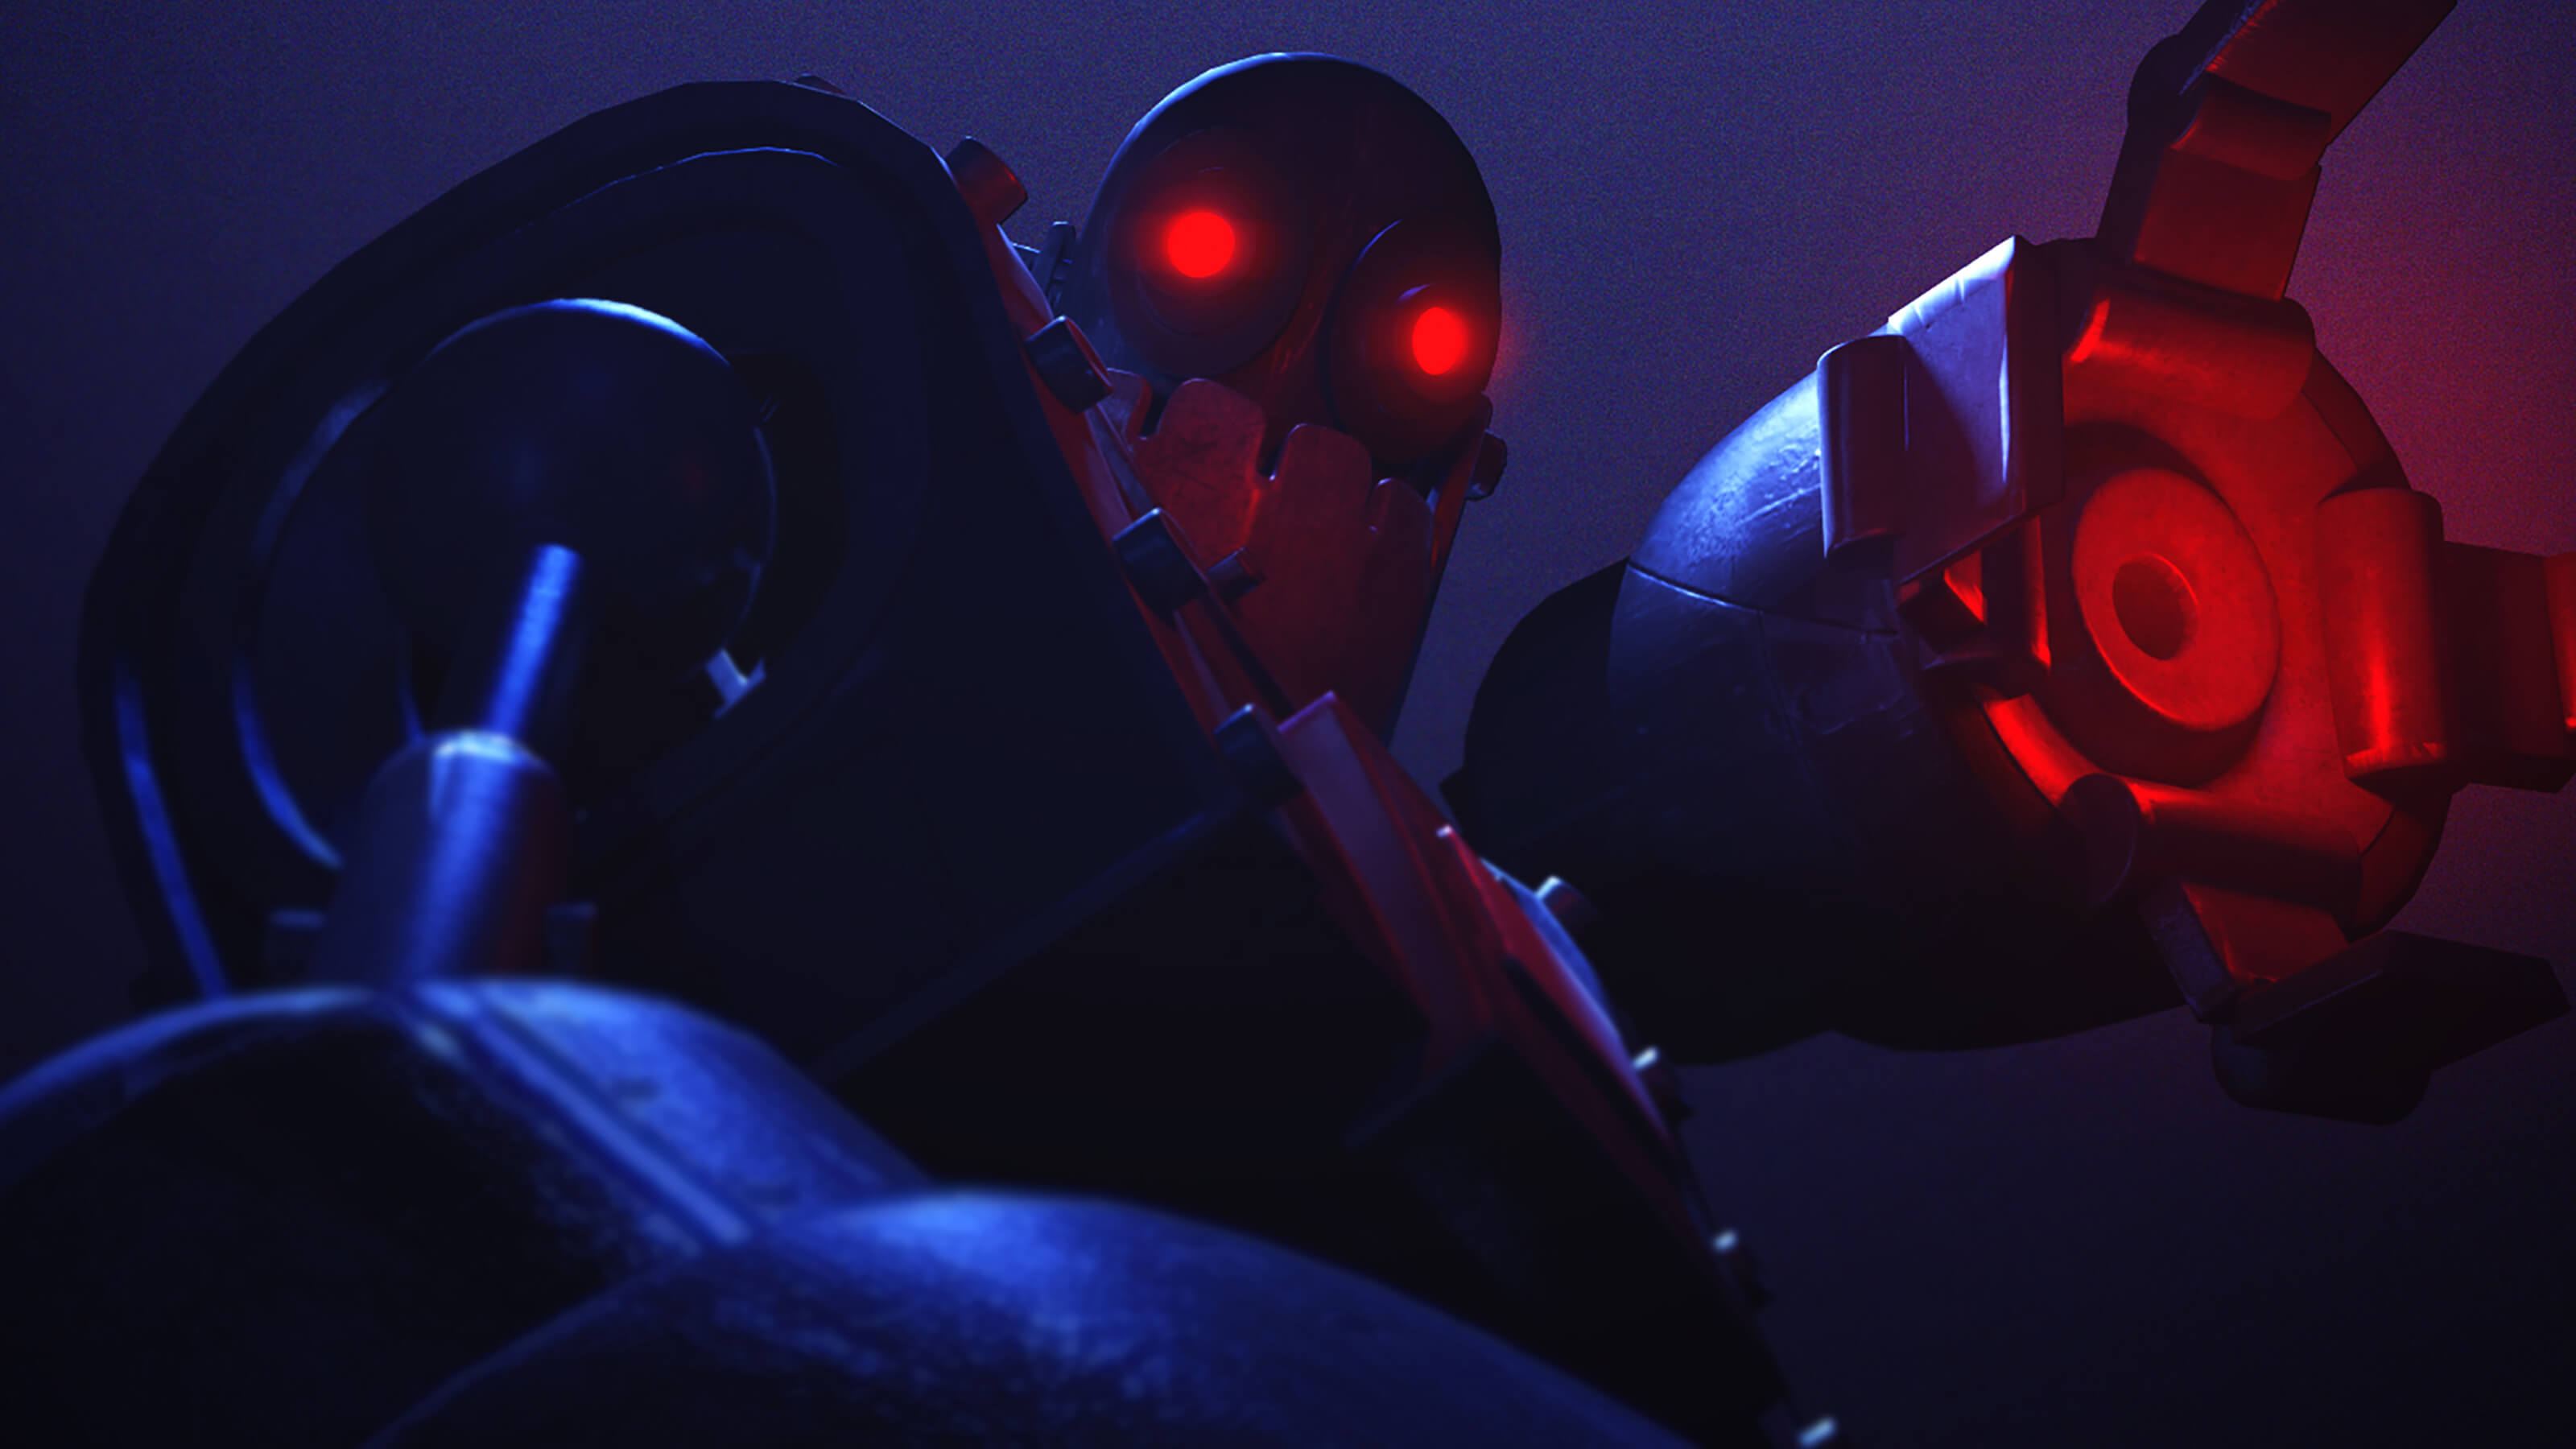 A dimly lit, metal robot raises an open claw as seen from below. Both its claw and eyes glow brightly red in the dark.